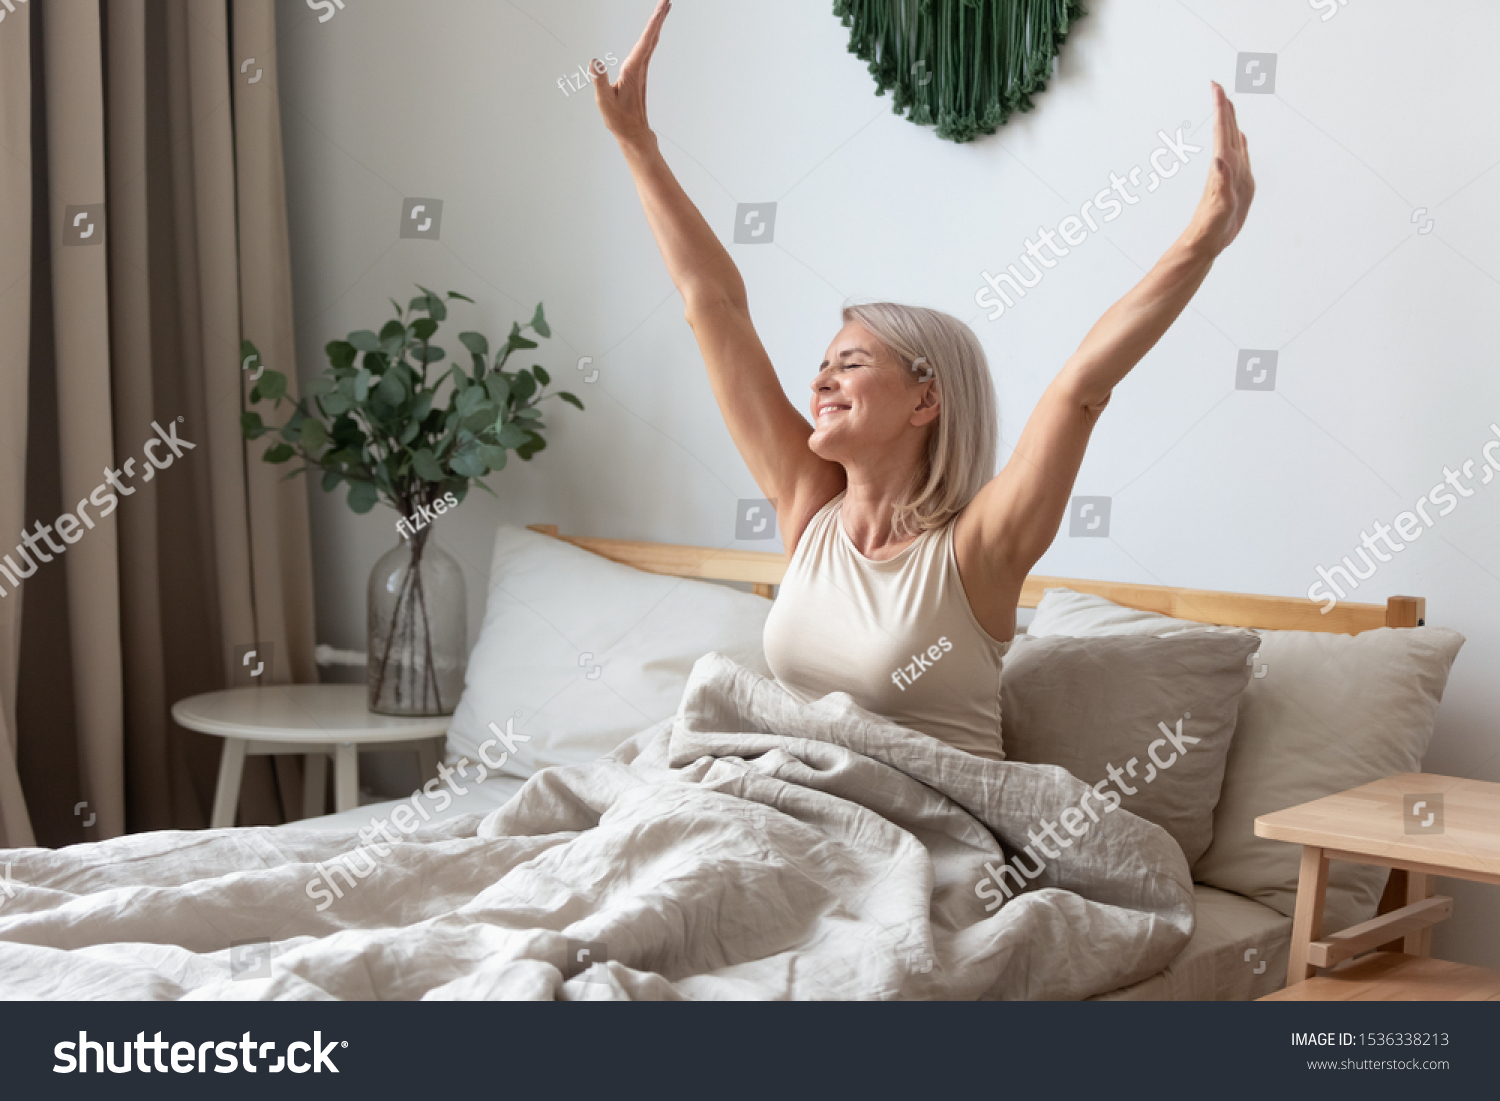 Happy fresh mature middle aged woman stretching in bed waking up alone happy concept, smiling old senior lady awake after healthy sleep sitting in cozy comfortable bedroom interior enjoy good morning #1536338213